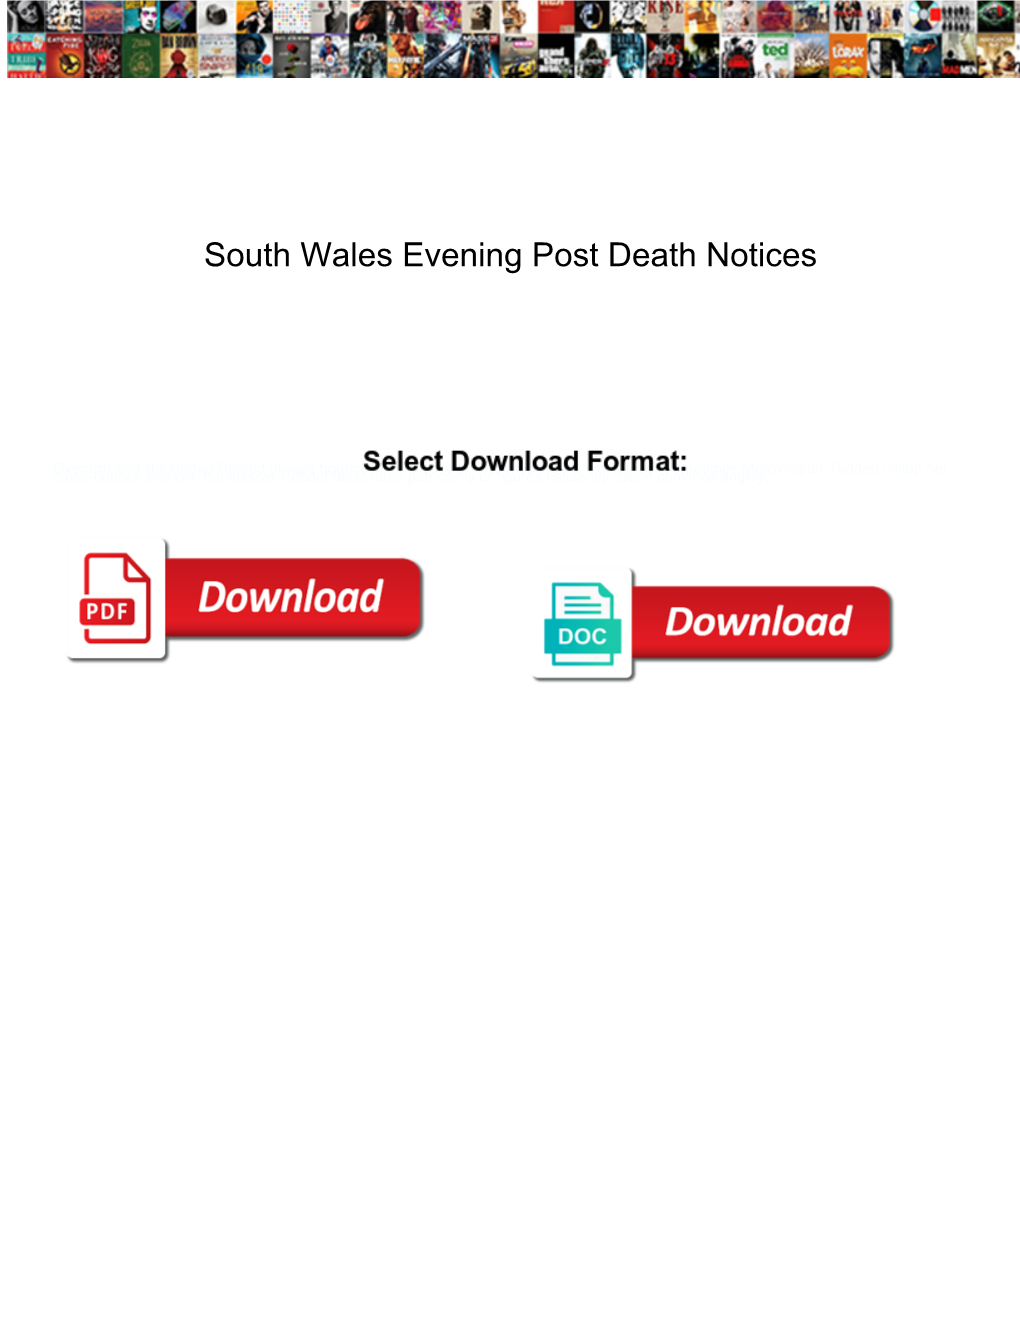 South Wales Evening Post Death Notices